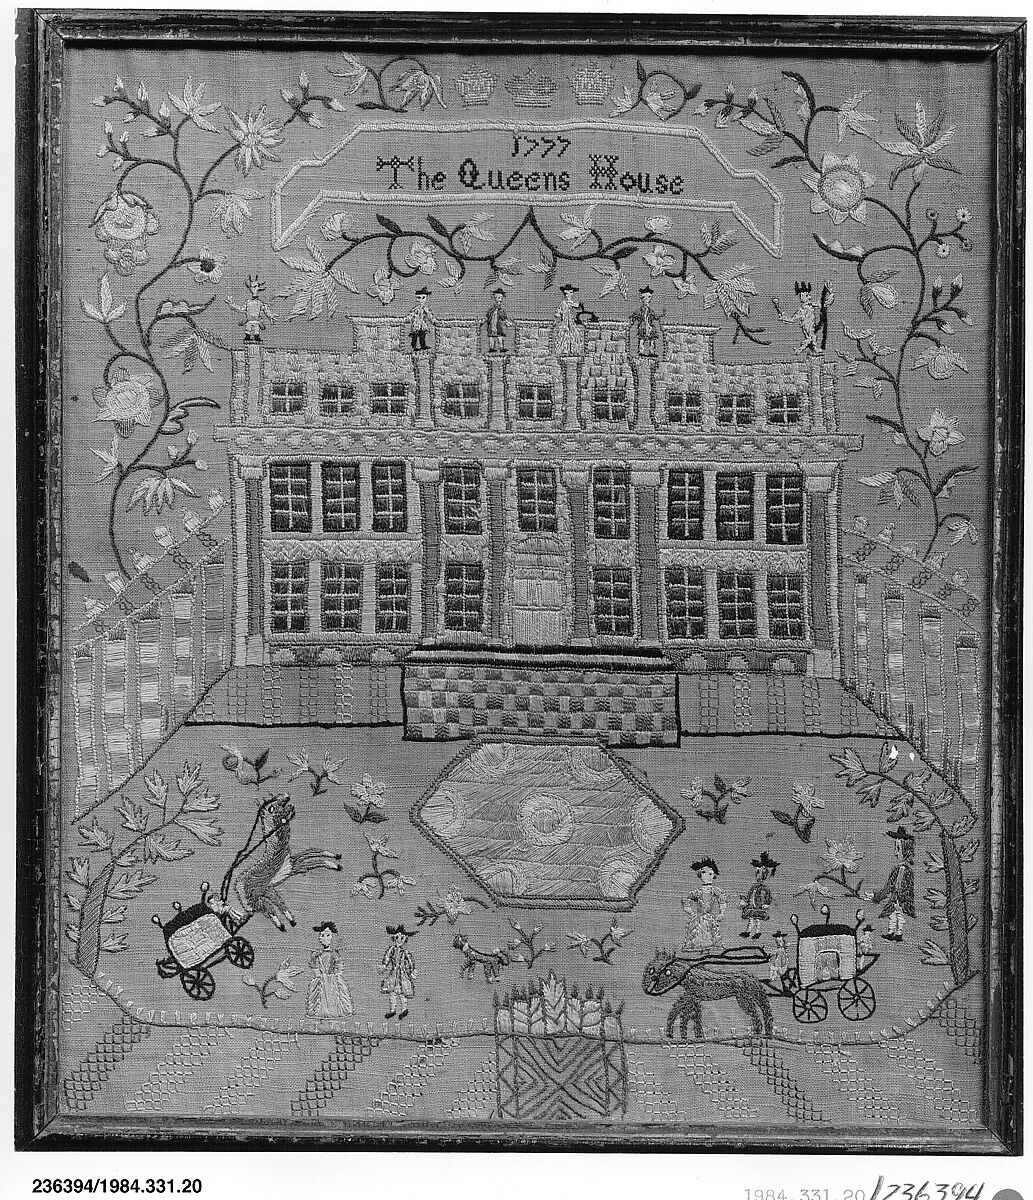 Embroidered sampler of the Queen's House, Greenwich, Silk on linen, British 